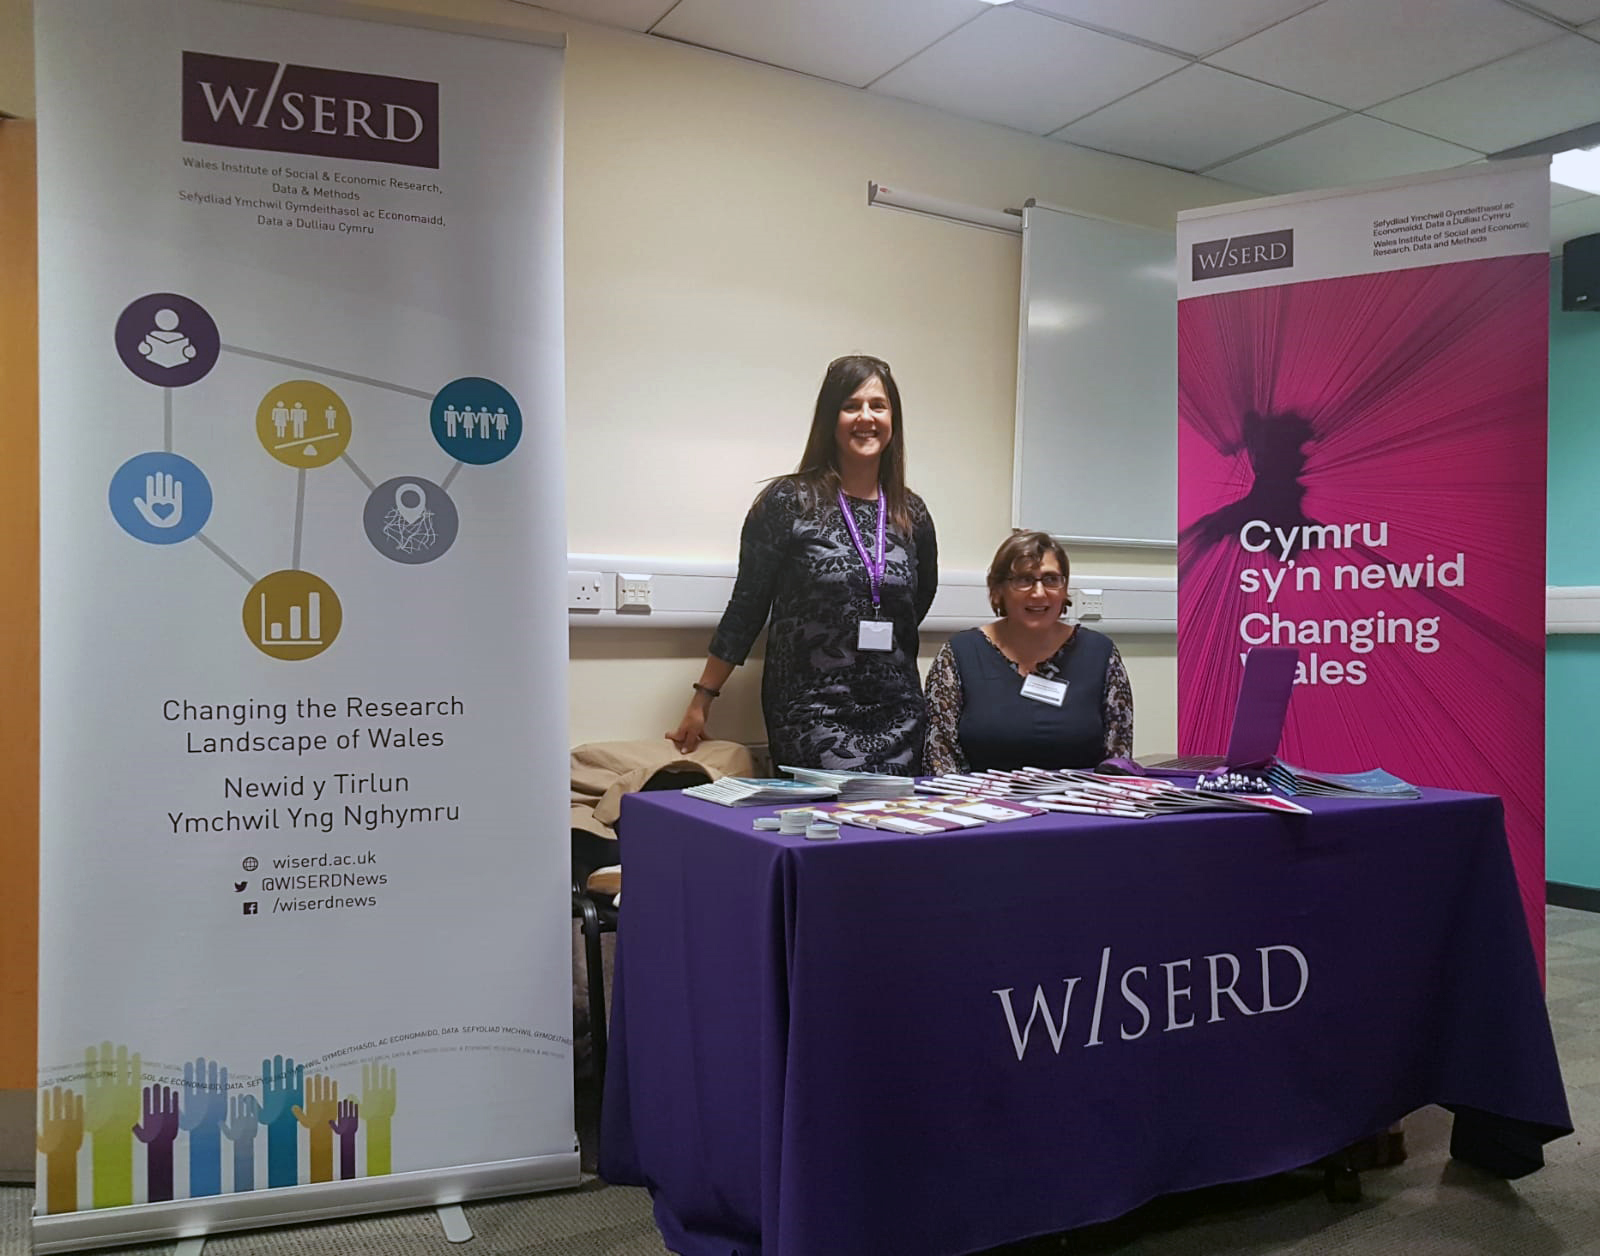 WISERD exhibition stand at Co-Production Network for Wales Conference